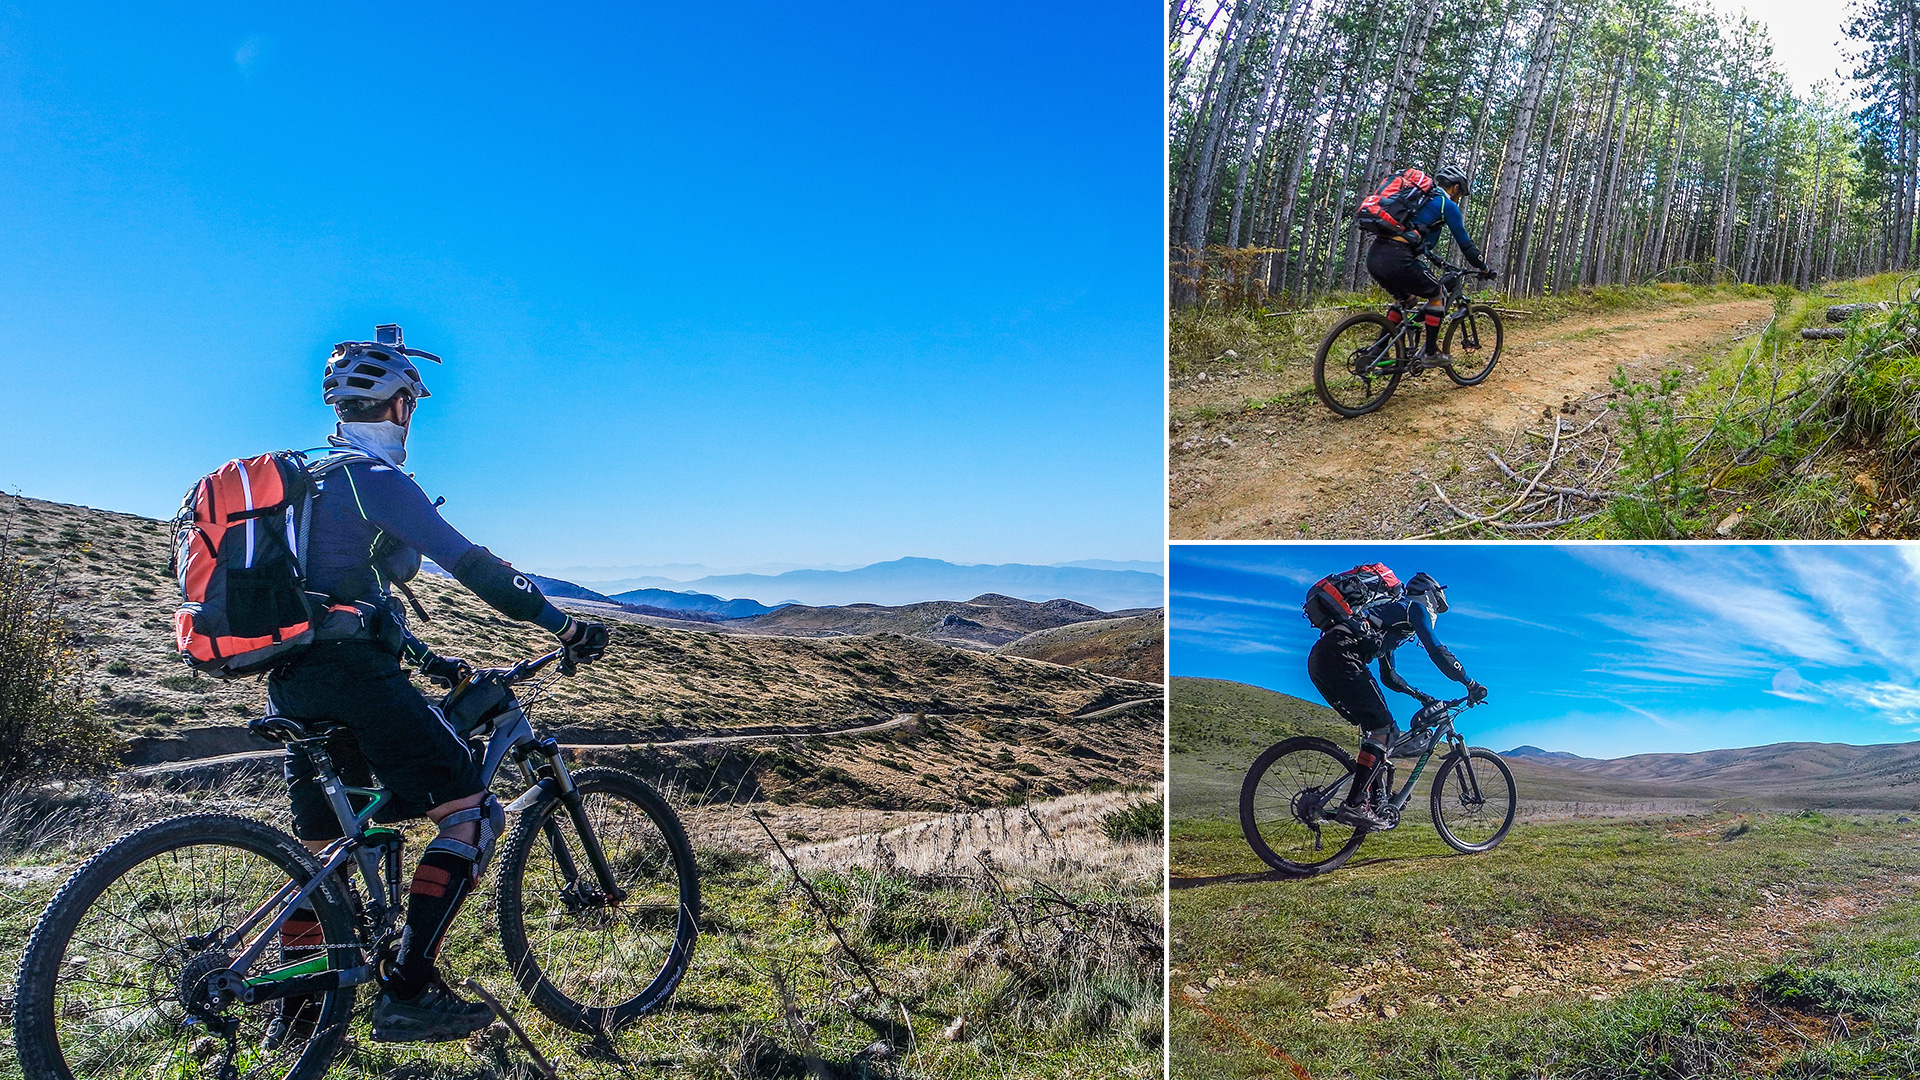 Take on the mountain on your own two wheels